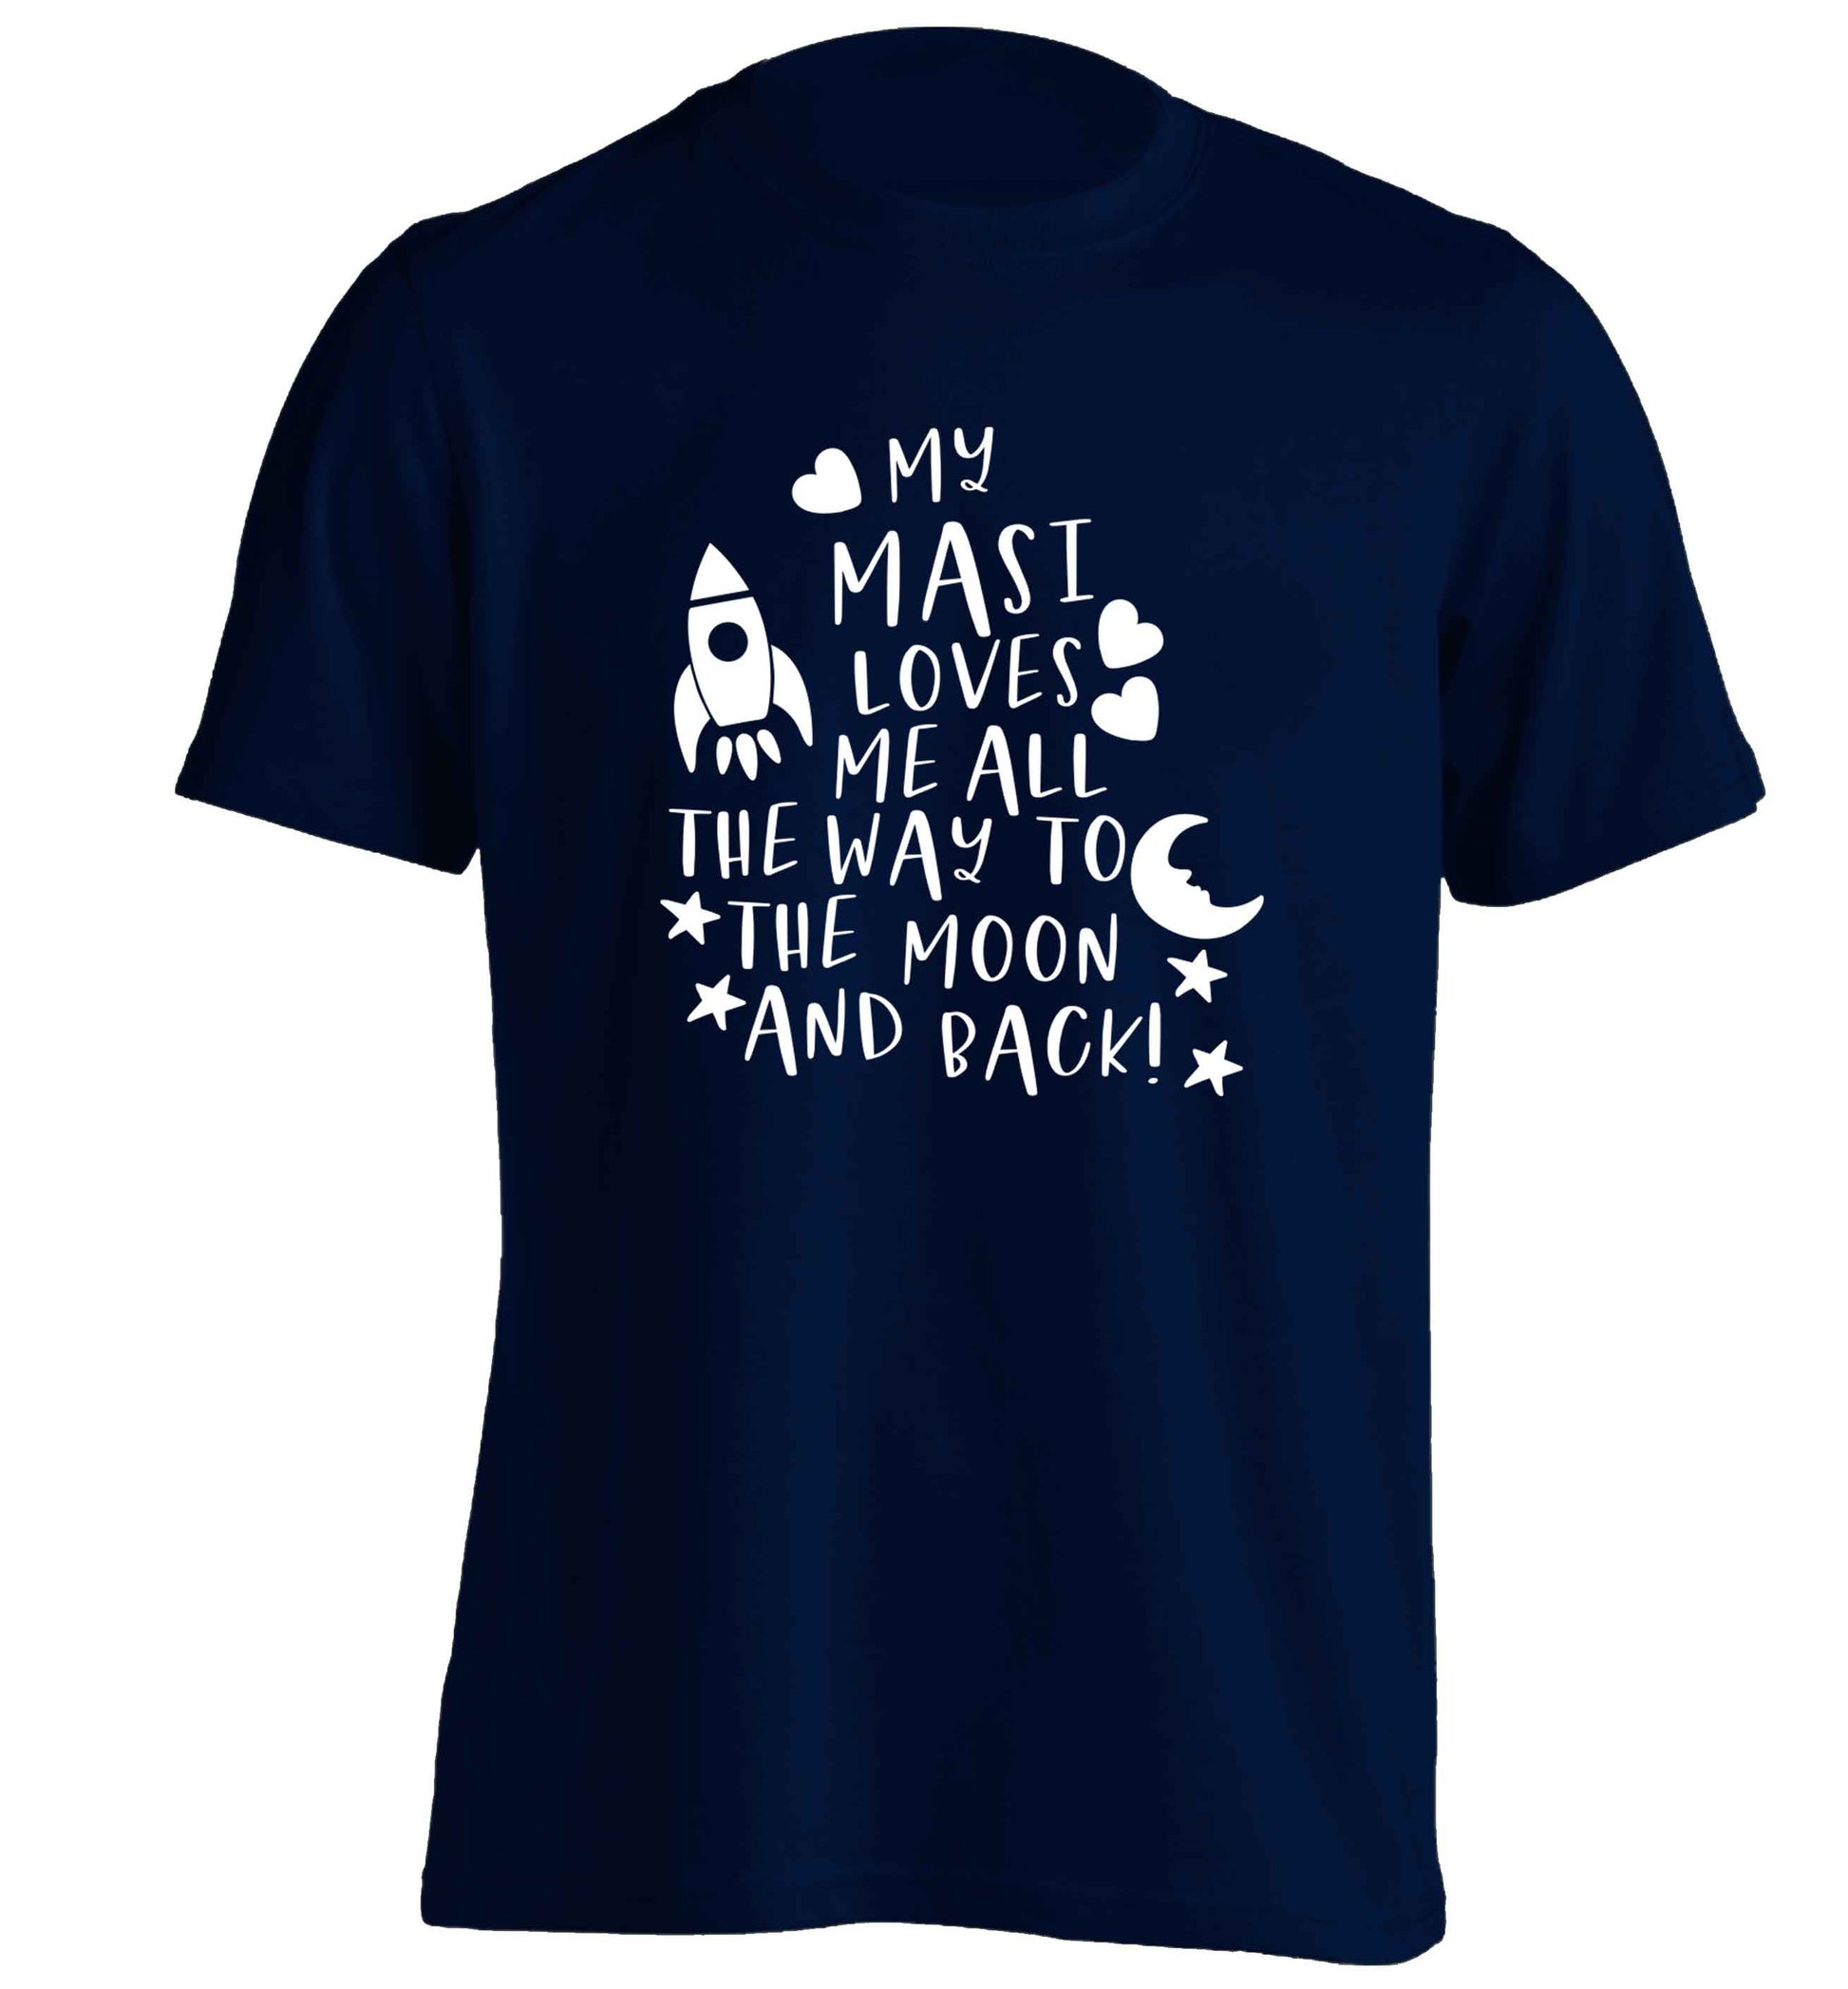 My masi loves me all the way to the moon and back adults unisex navy Tshirt 2XL